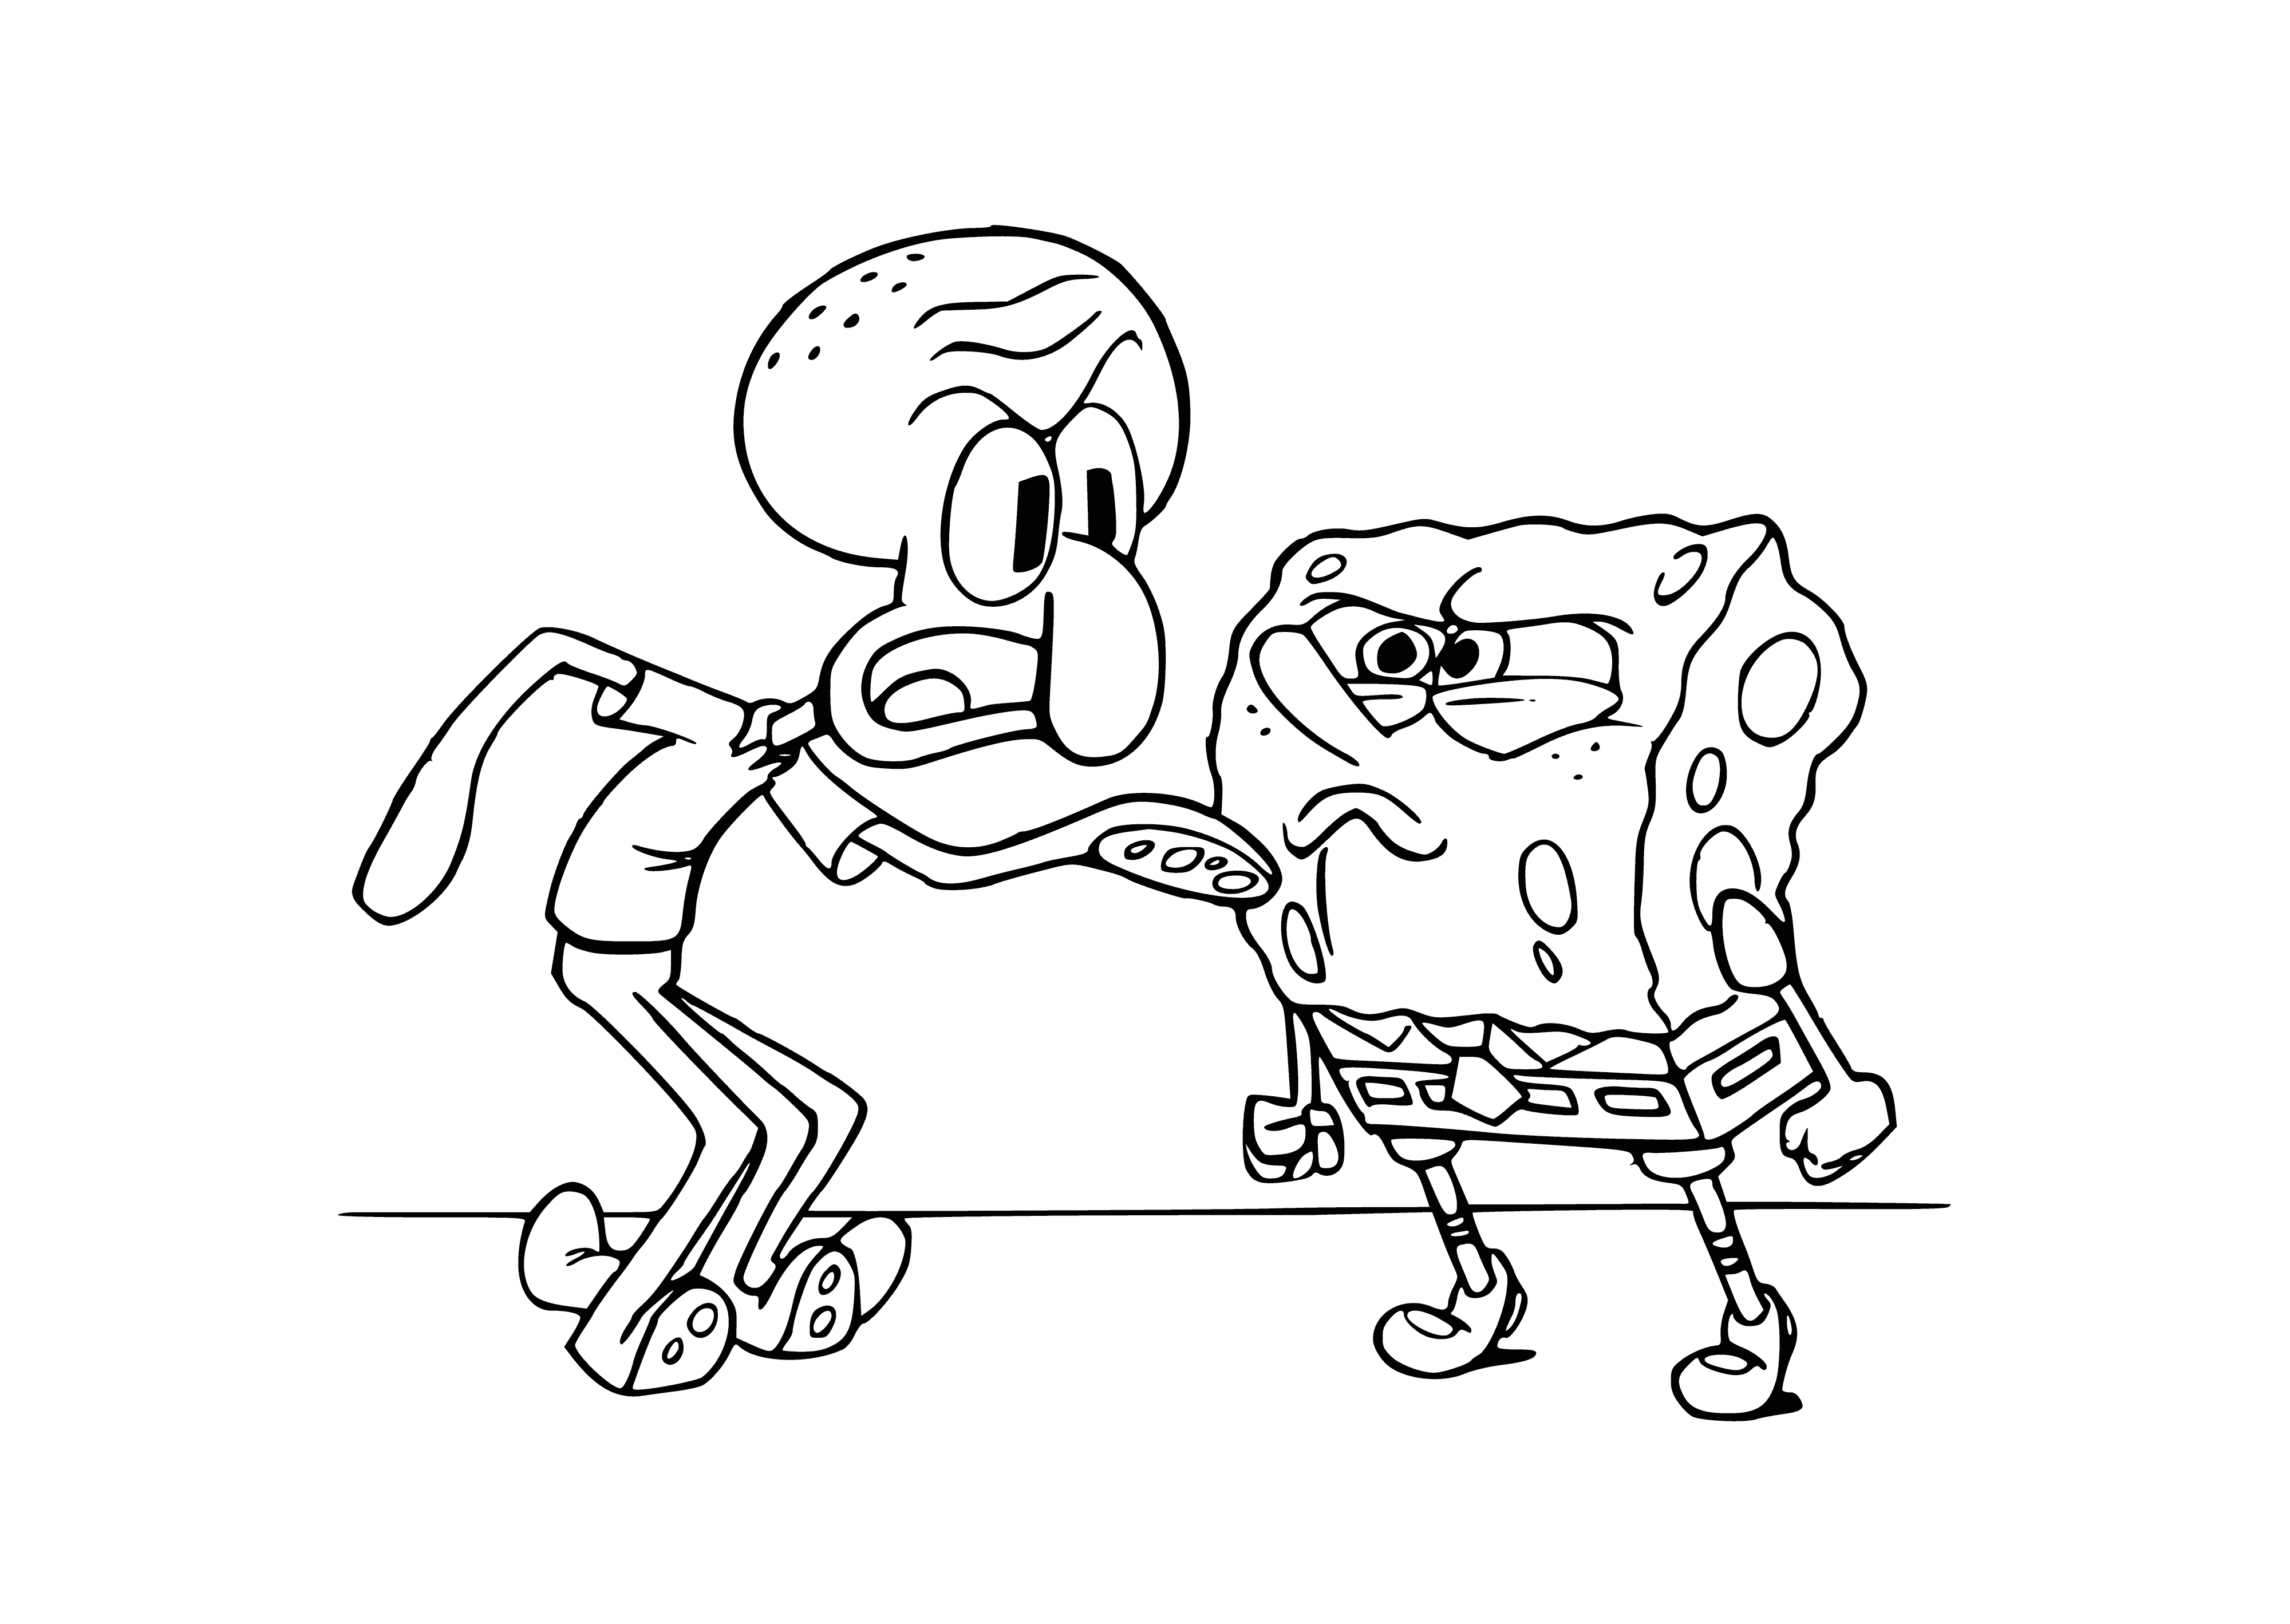 coloring page: Spongebob looks unhappy; it appears he's in the midst of a conflict. #spongebob #conflict